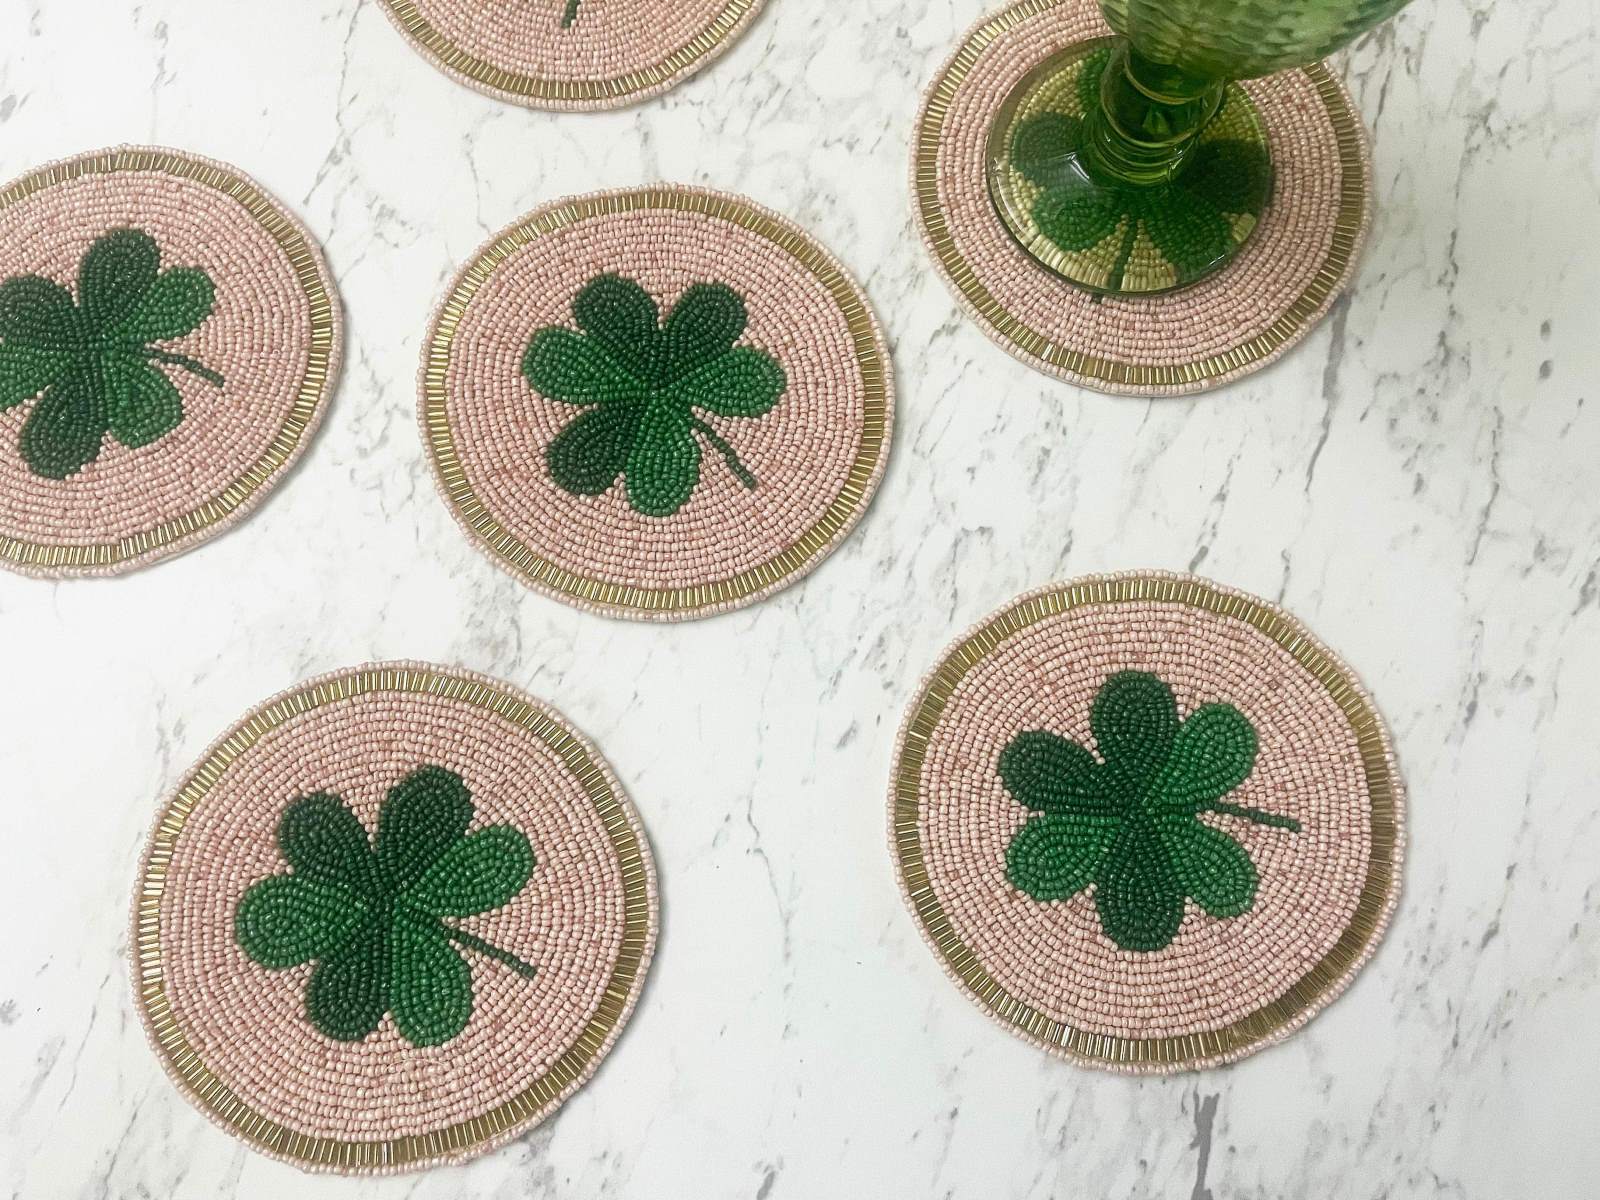 Crafty Clover Coasters: DIY Home Improvement For St. Patrick’s Day